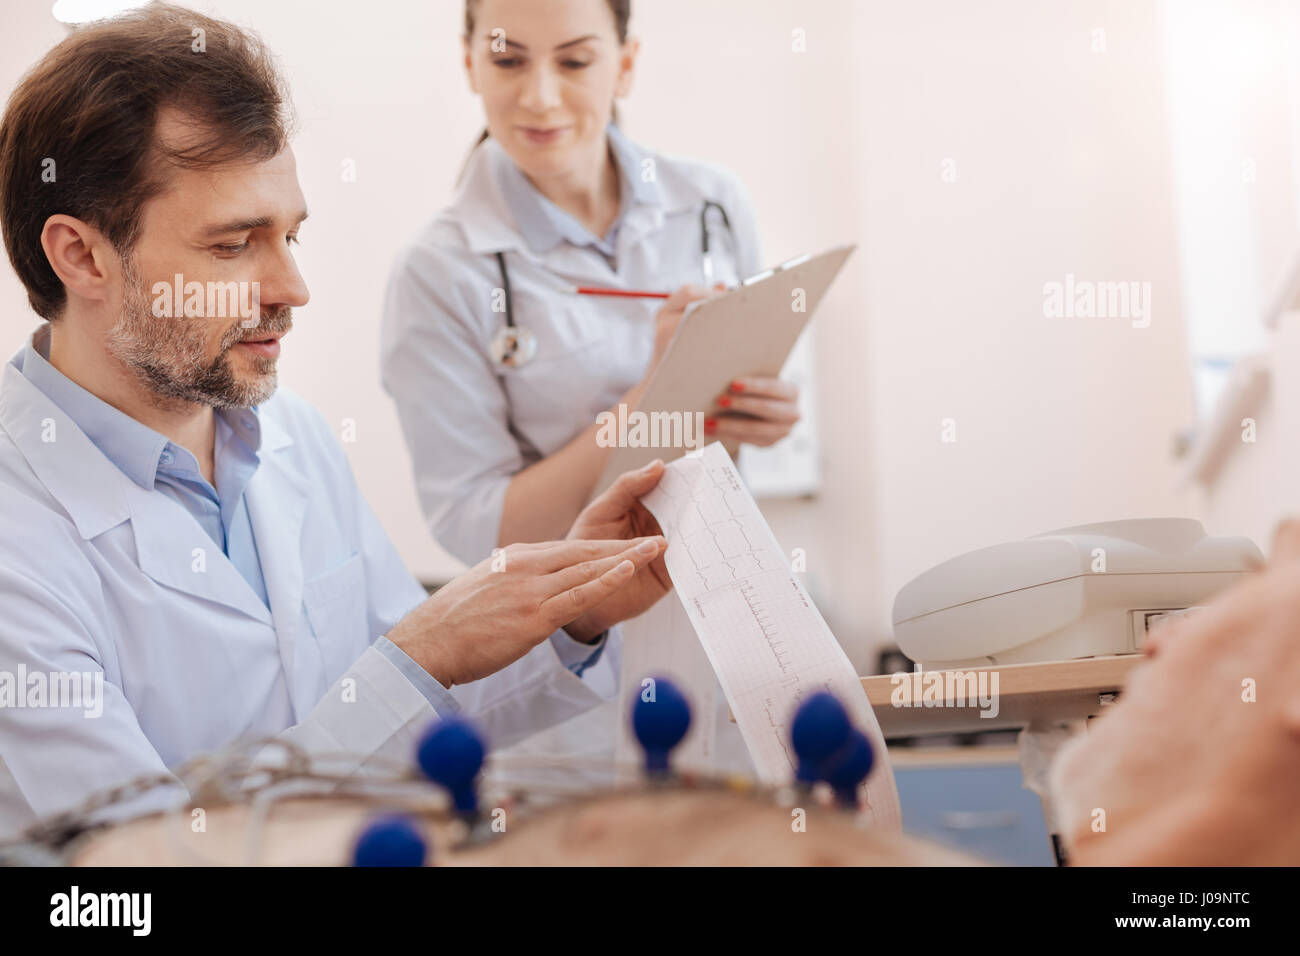 Great professional nurse helping a doctor Stock Photo